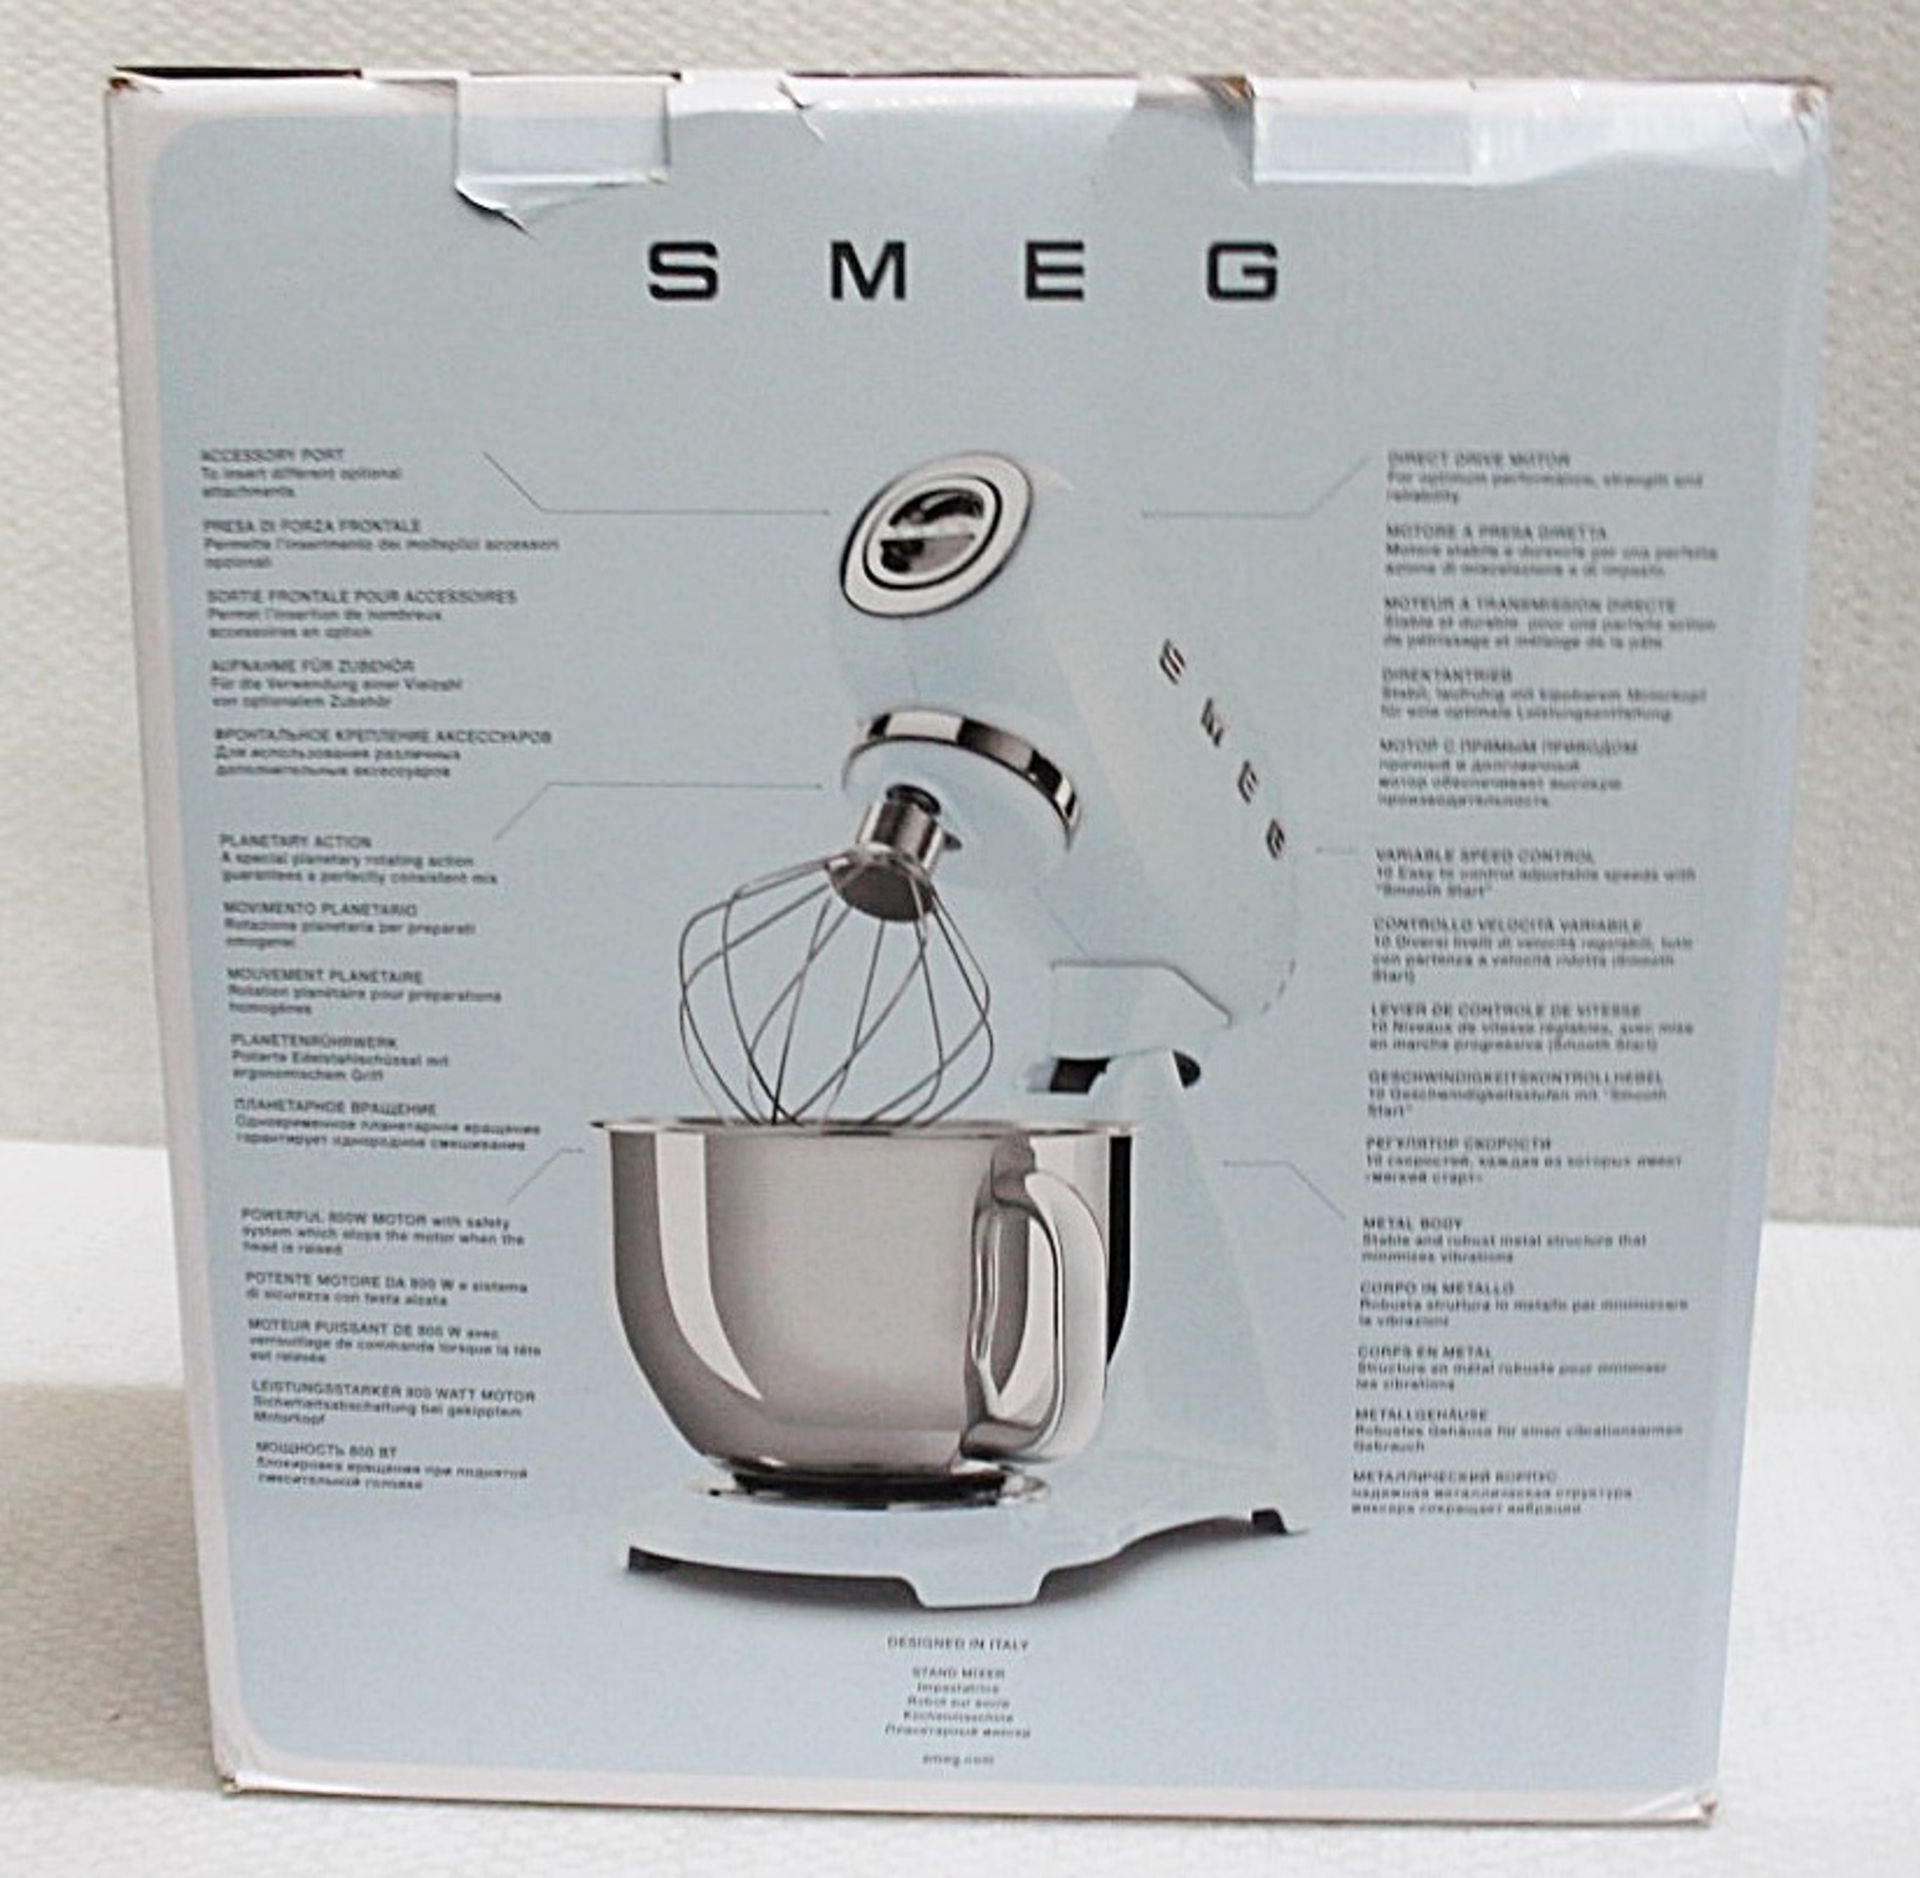 1 x SMEG 50'S Style Stand Mixer In White (4.8L) - Original Price £499.00 - Unused Boxed Stock - Image 21 of 21